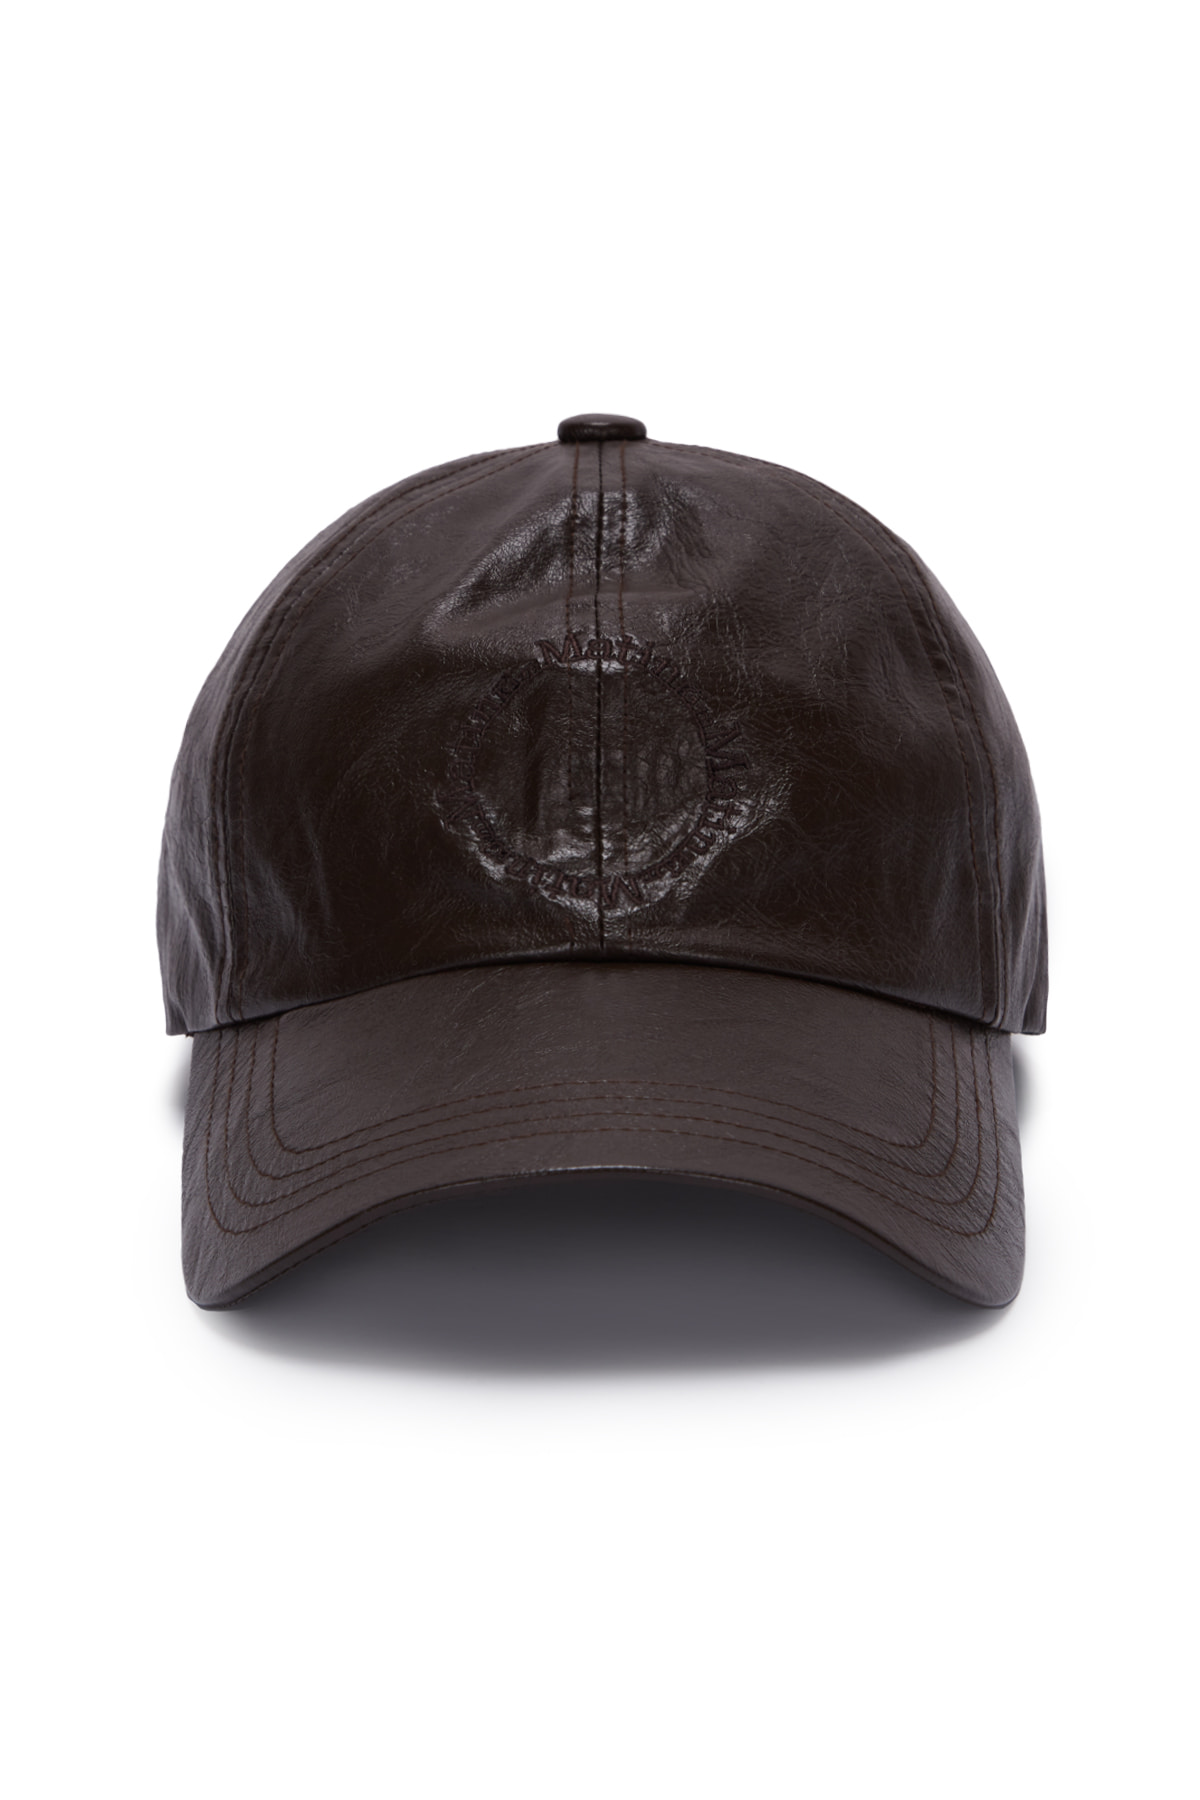 GLOSSY LEATHER BALL CAP IN BROWN